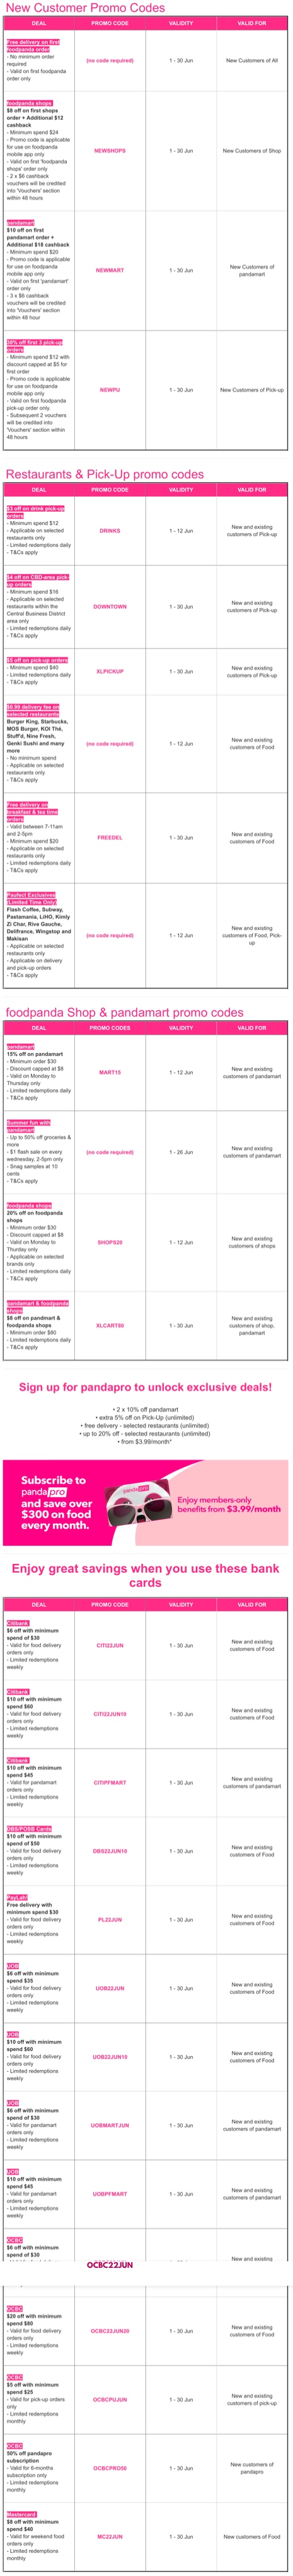 Lobang: 24 foodpanda promo codes for use in the month of June 2022 - 3